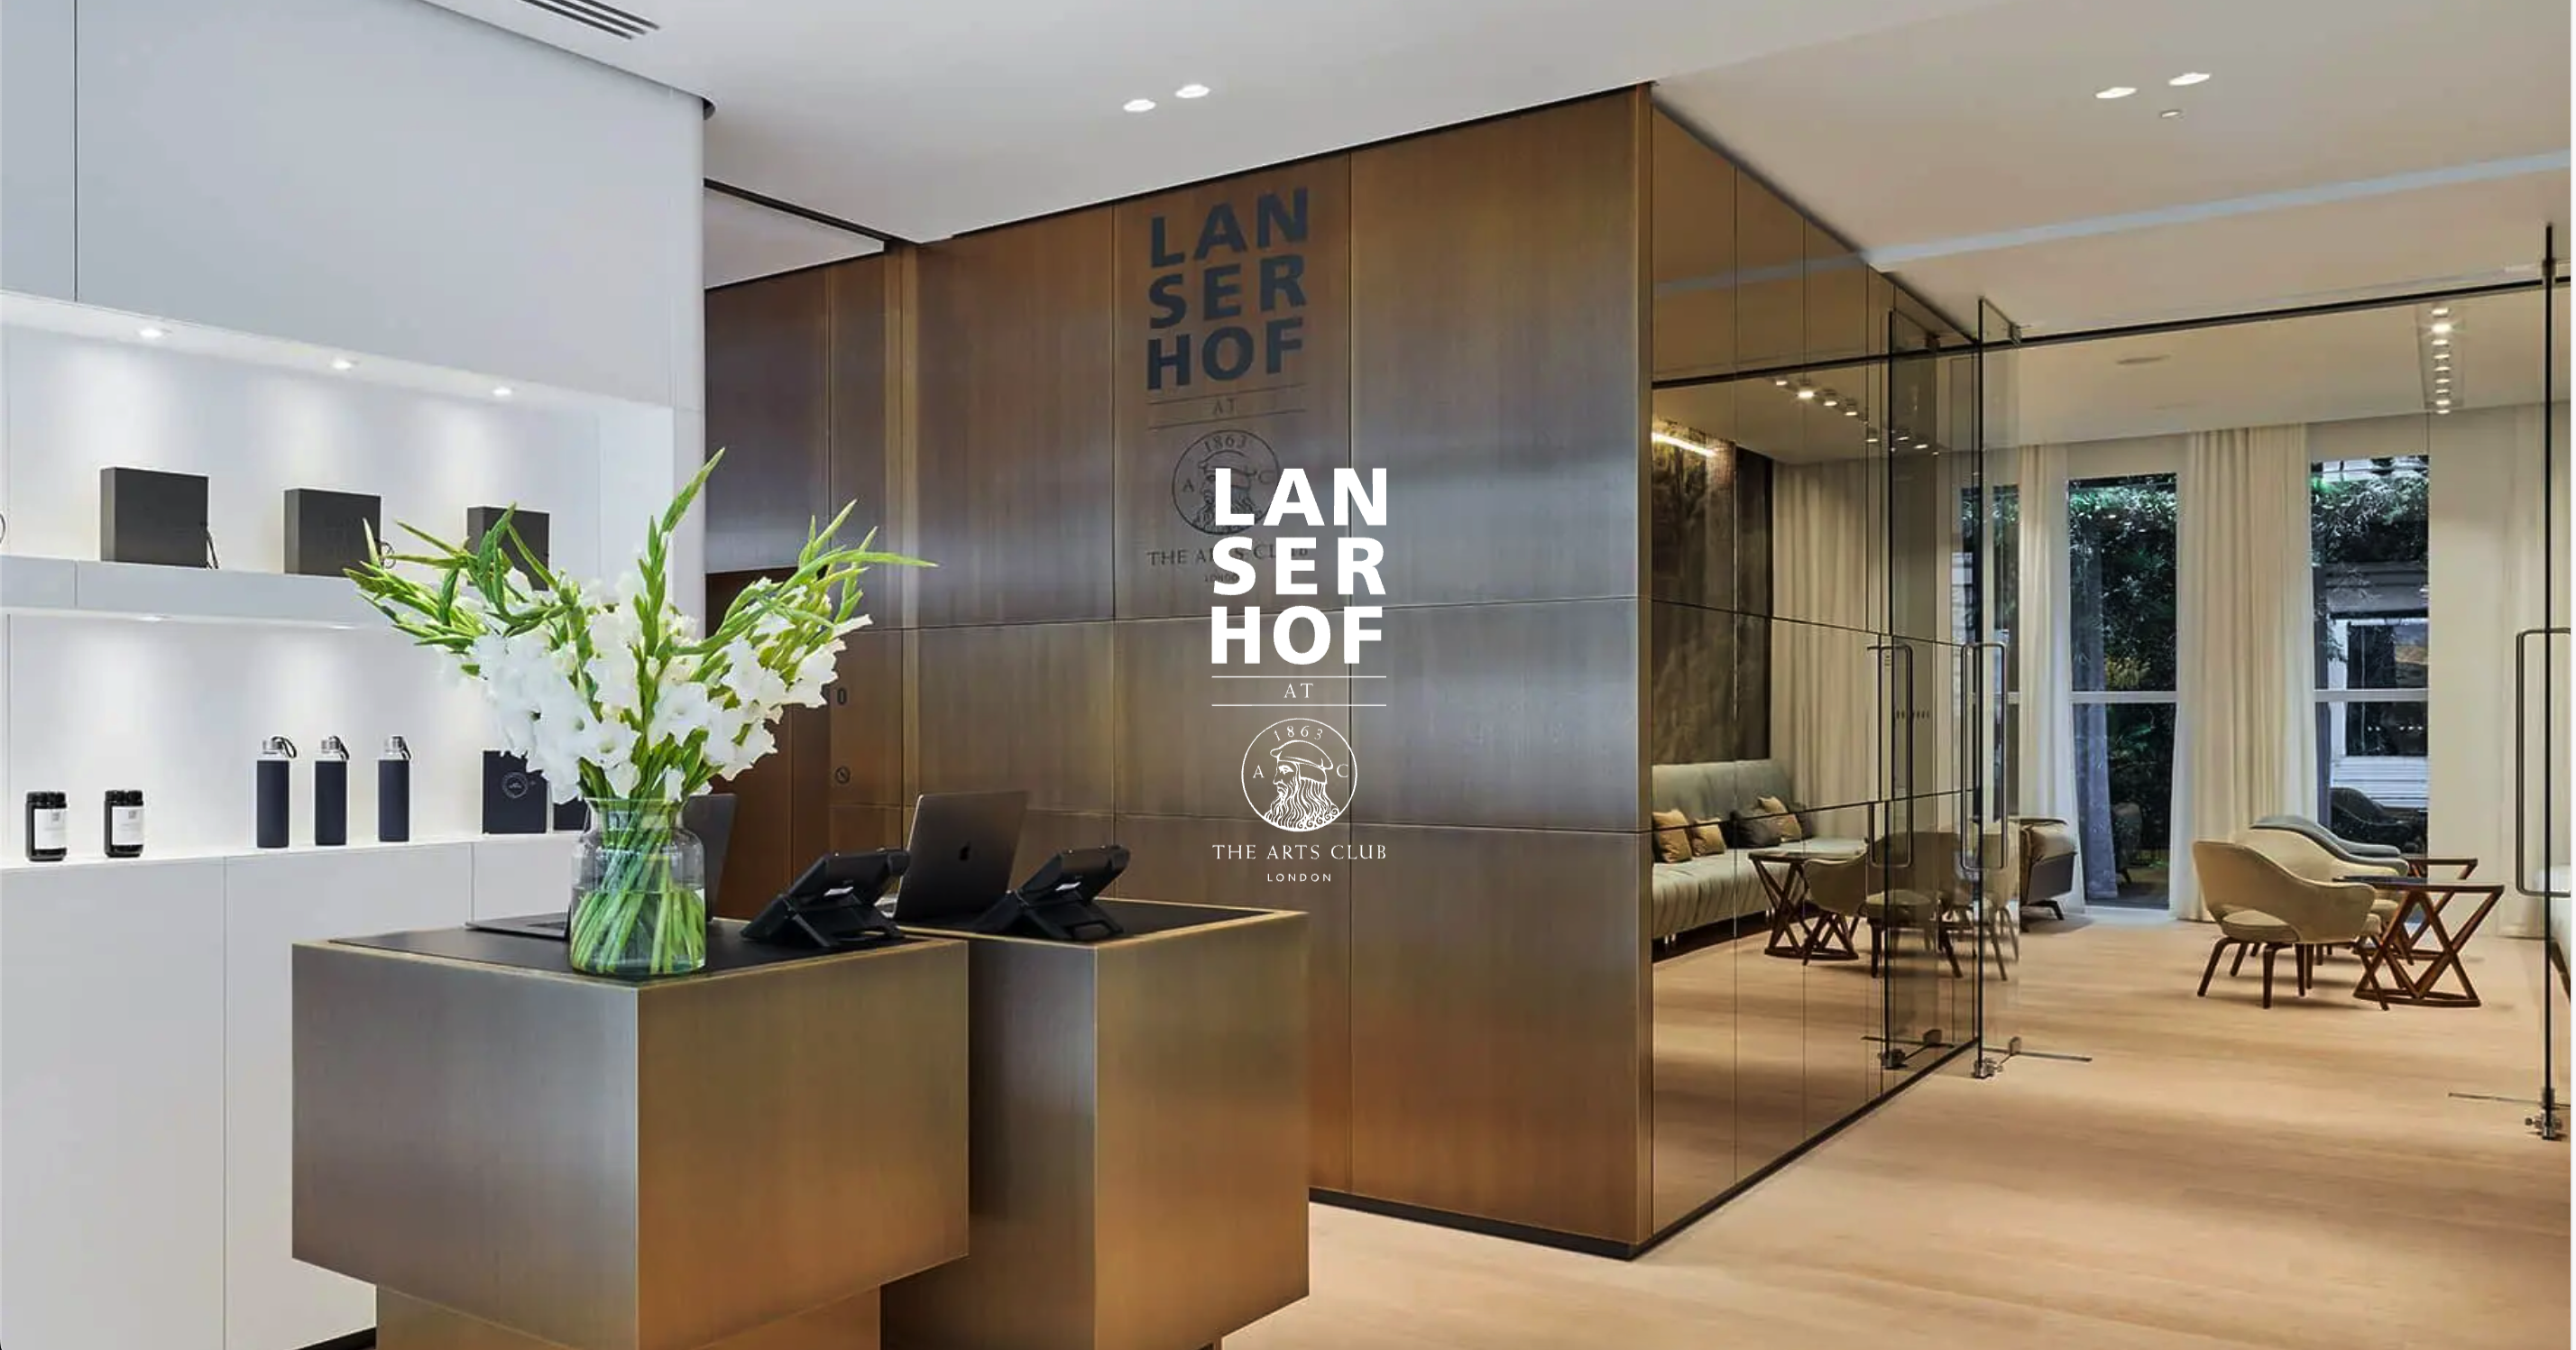 The London Osteoporosis Clinic is excited to announce a collaboration with the Lanserhof Clinic in Mayfair.